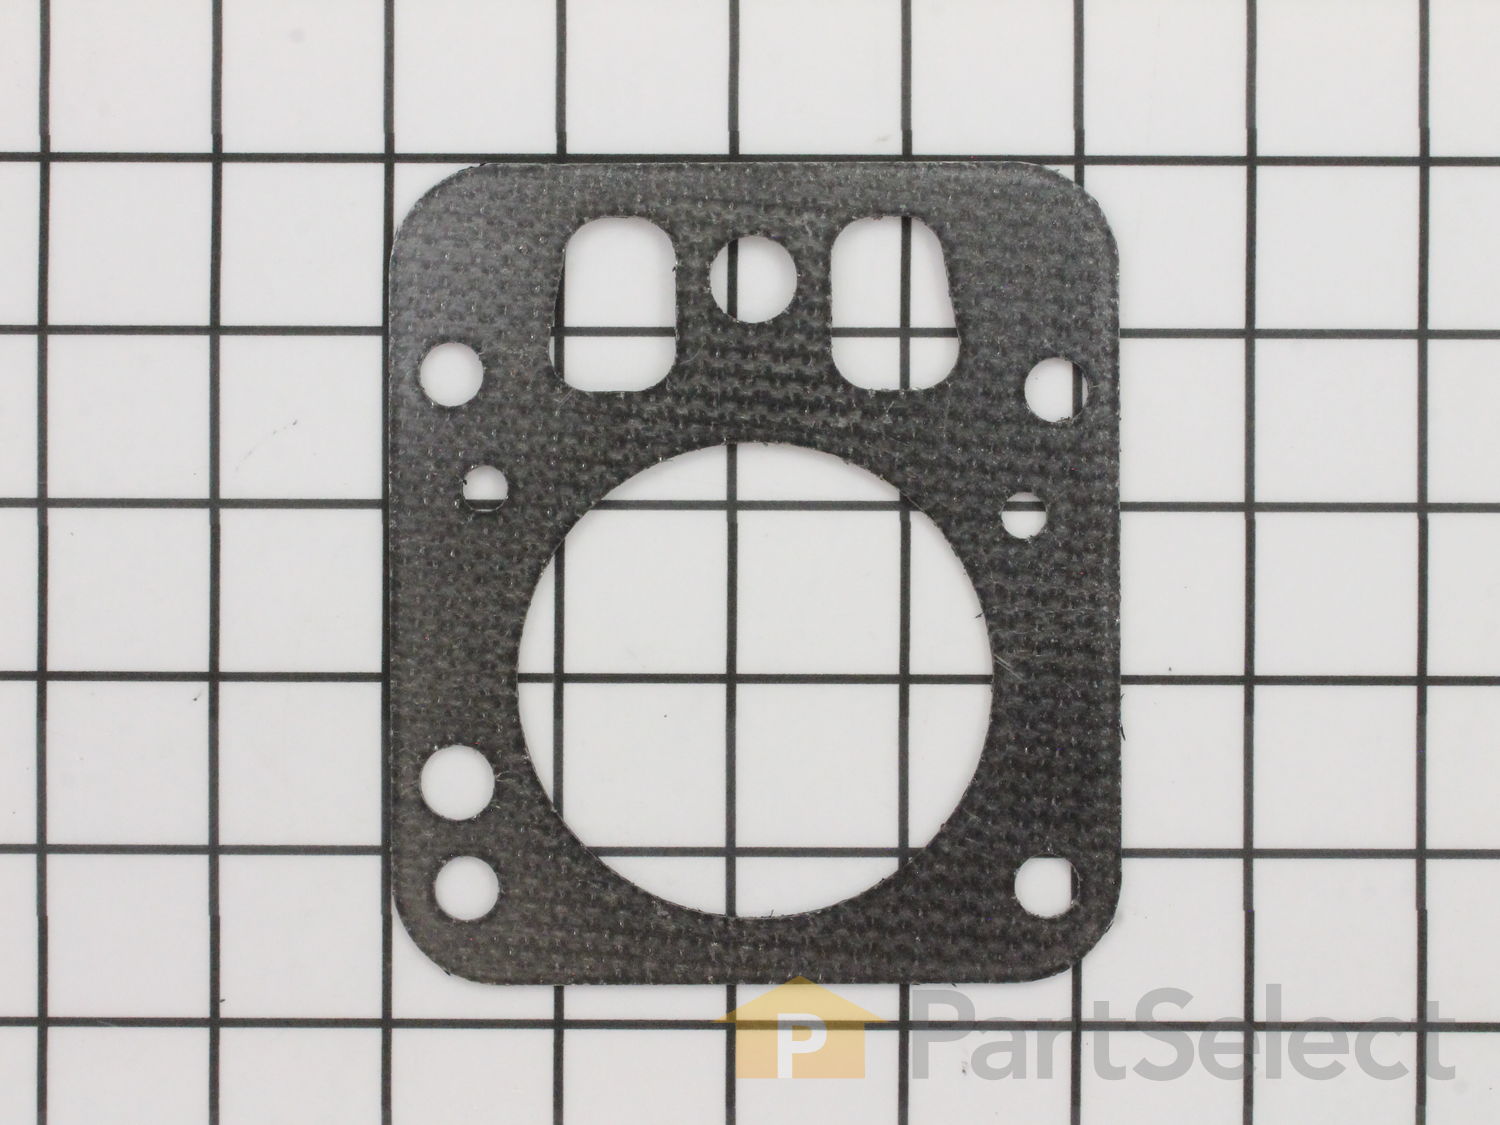 Briggs And Stratton Head Gasket Chart